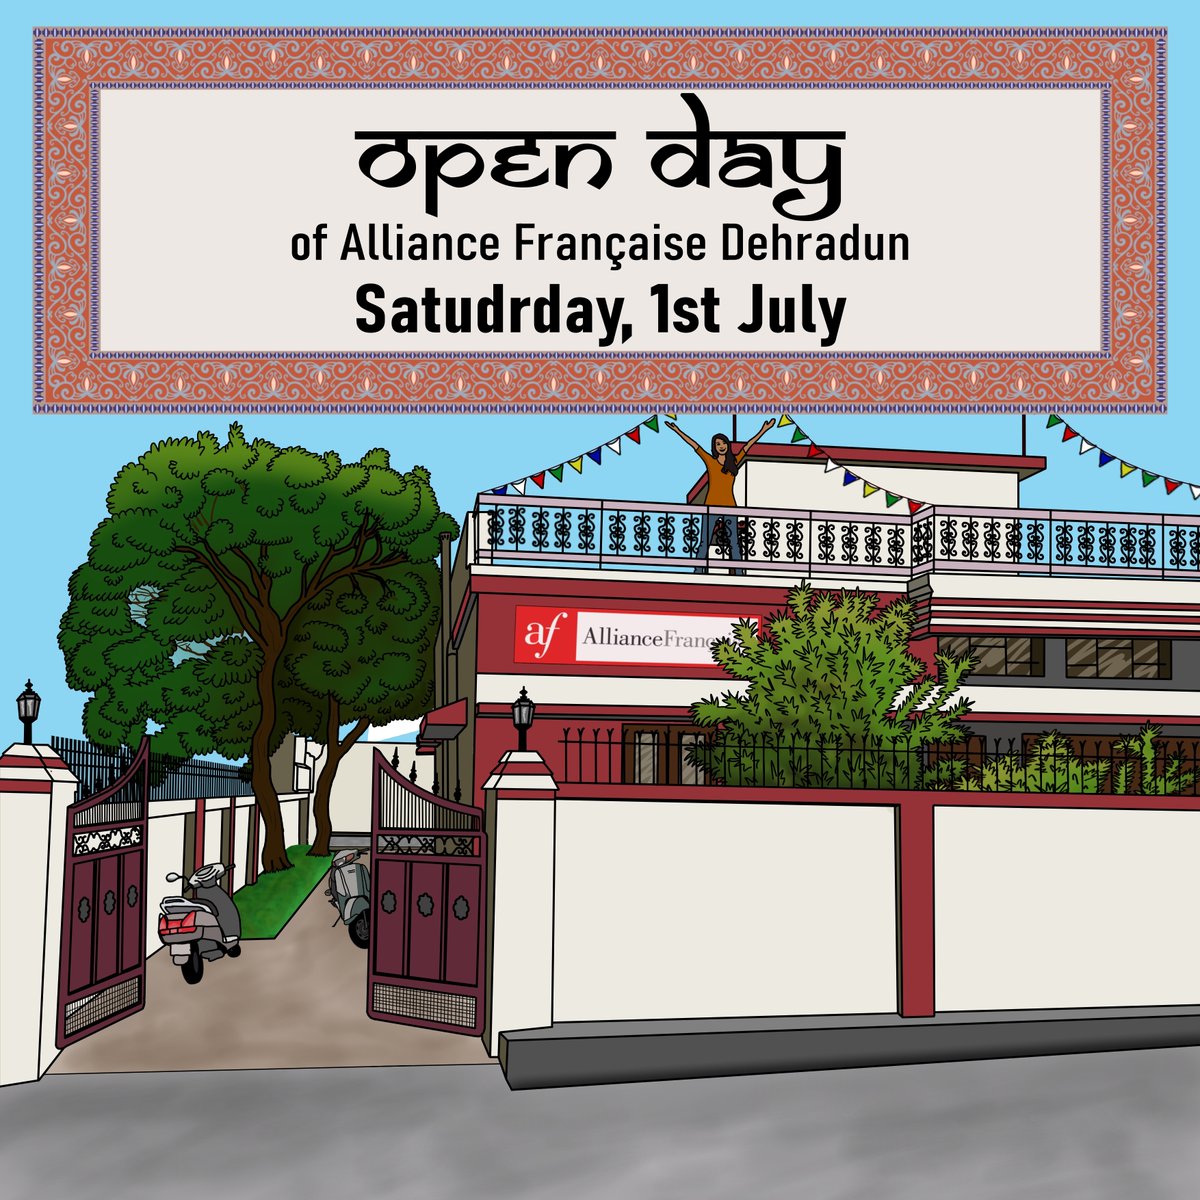 Saturday, 1st July we are organising a OPEN DAY with lot of activities all along the day ! 🎉

Stay connected for more information about the activities, we will post them all along the week.

Open to all, all day long !

📍 Araghar Chowk